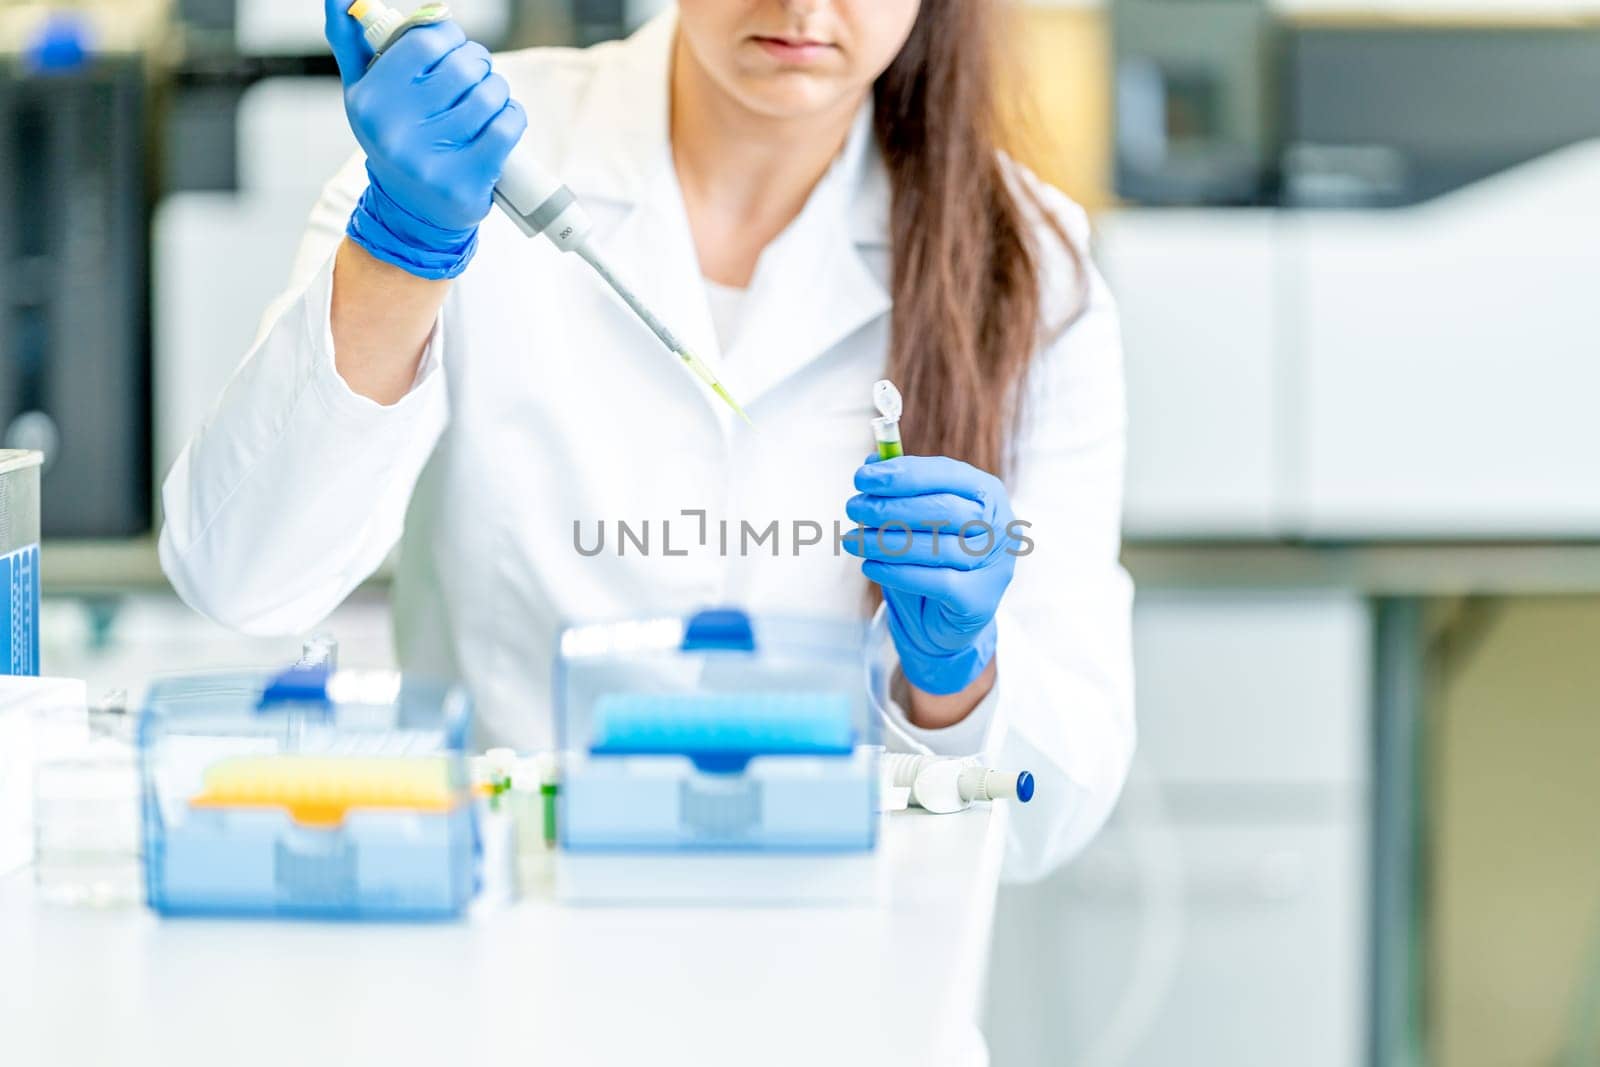 dropper dosing of chemical samples into flasks for research in a scientific laboratory by Edophoto